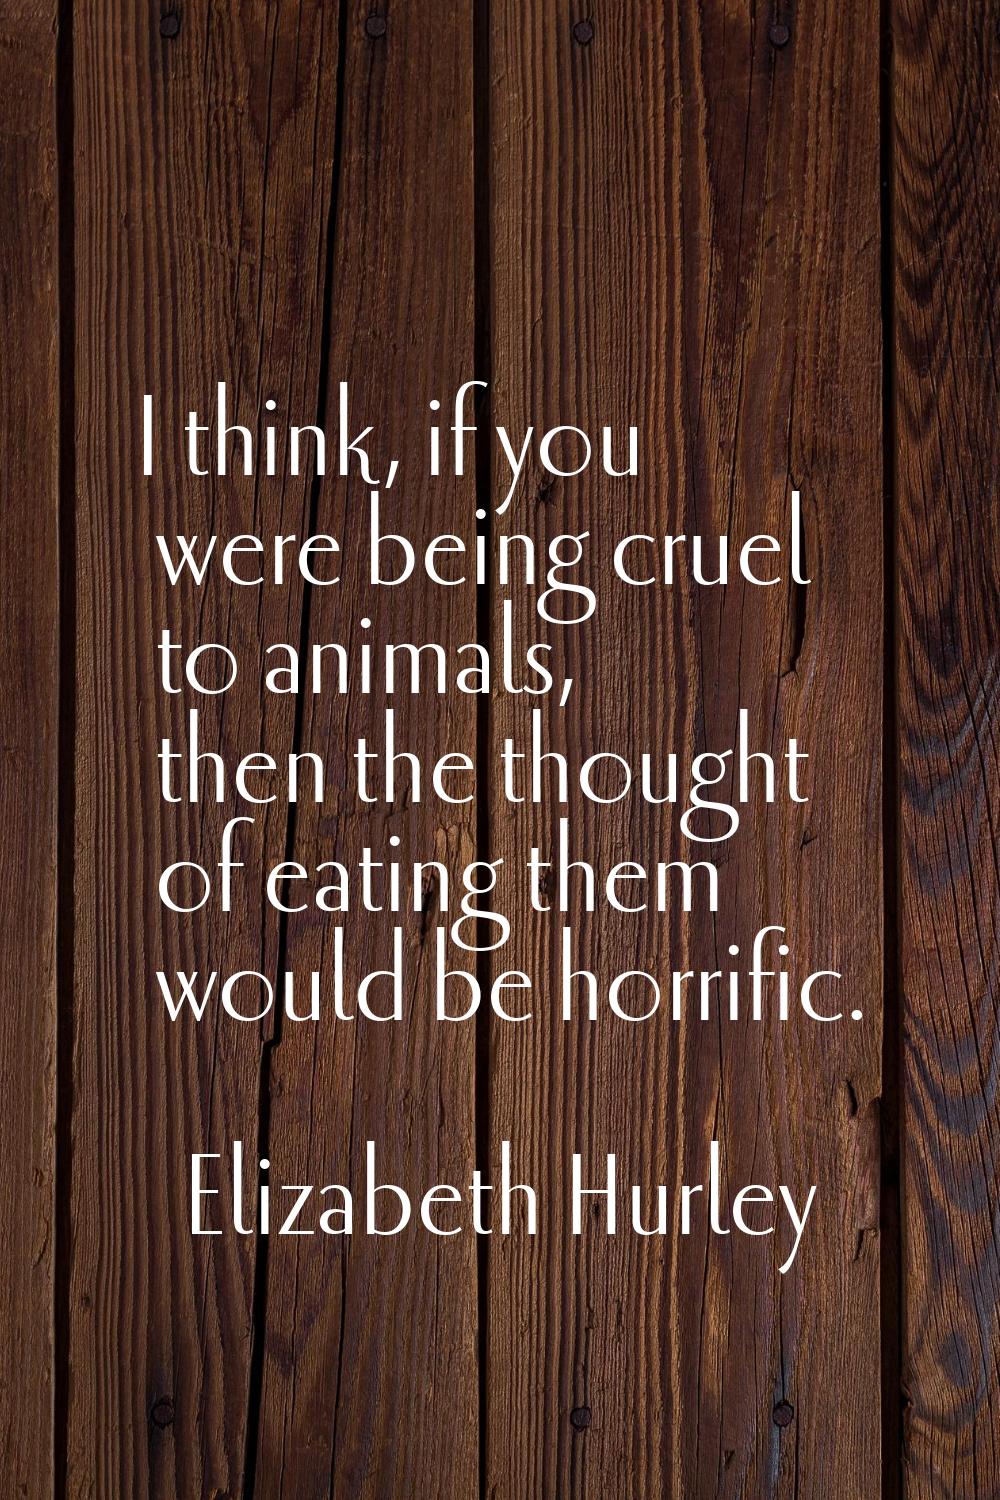 I think, if you were being cruel to animals, then the thought of eating them would be horrific.